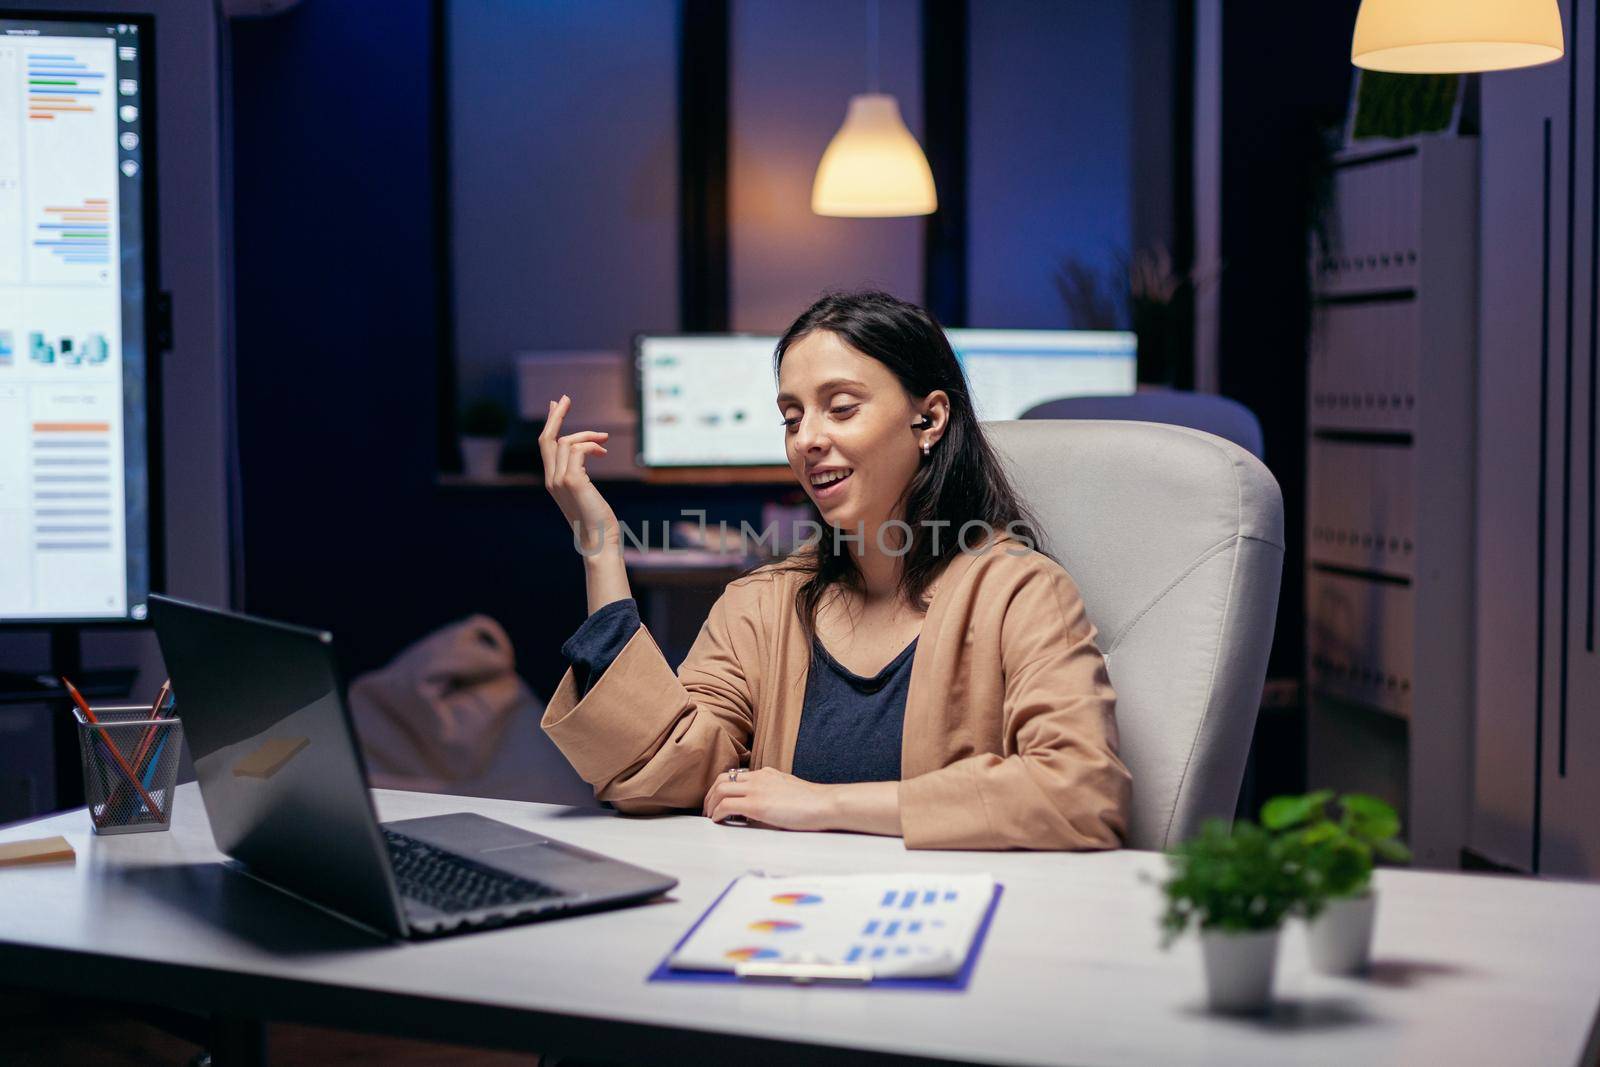 Employee having video conference working overtime in business workplace. Woman working on finance during a video conference with coworkers at night hours in the office.